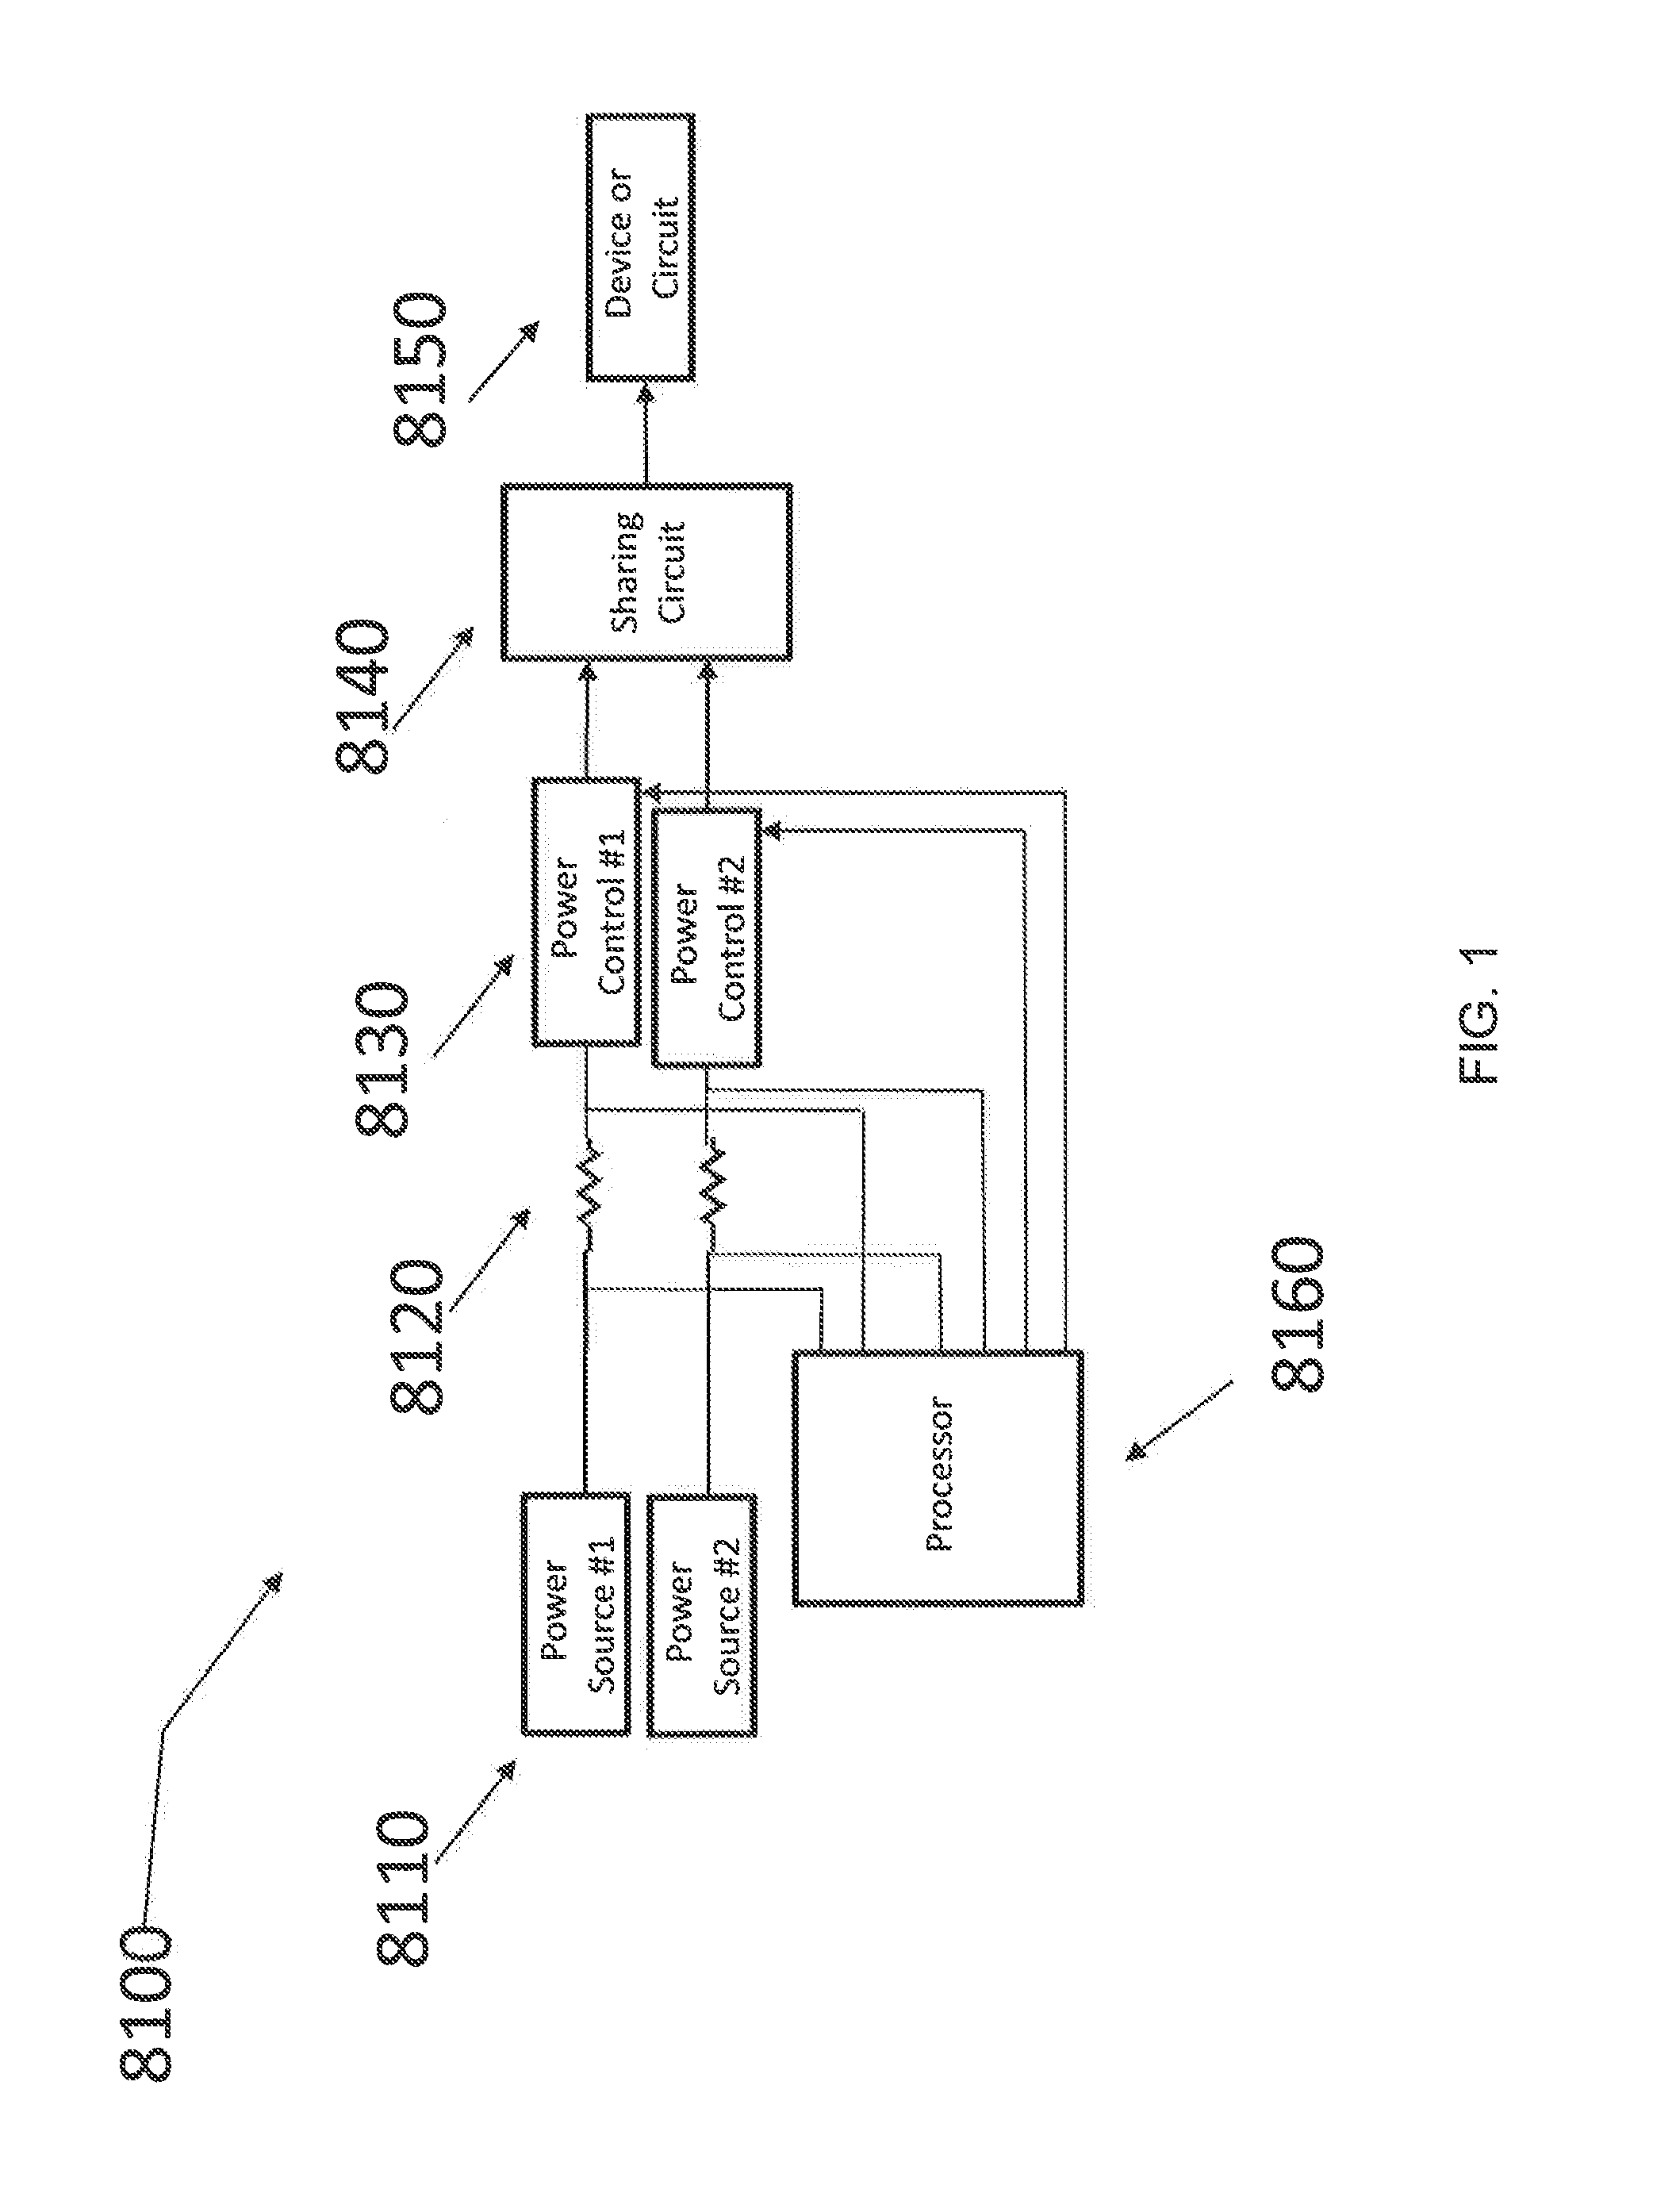 Wireless lighting device with charging port